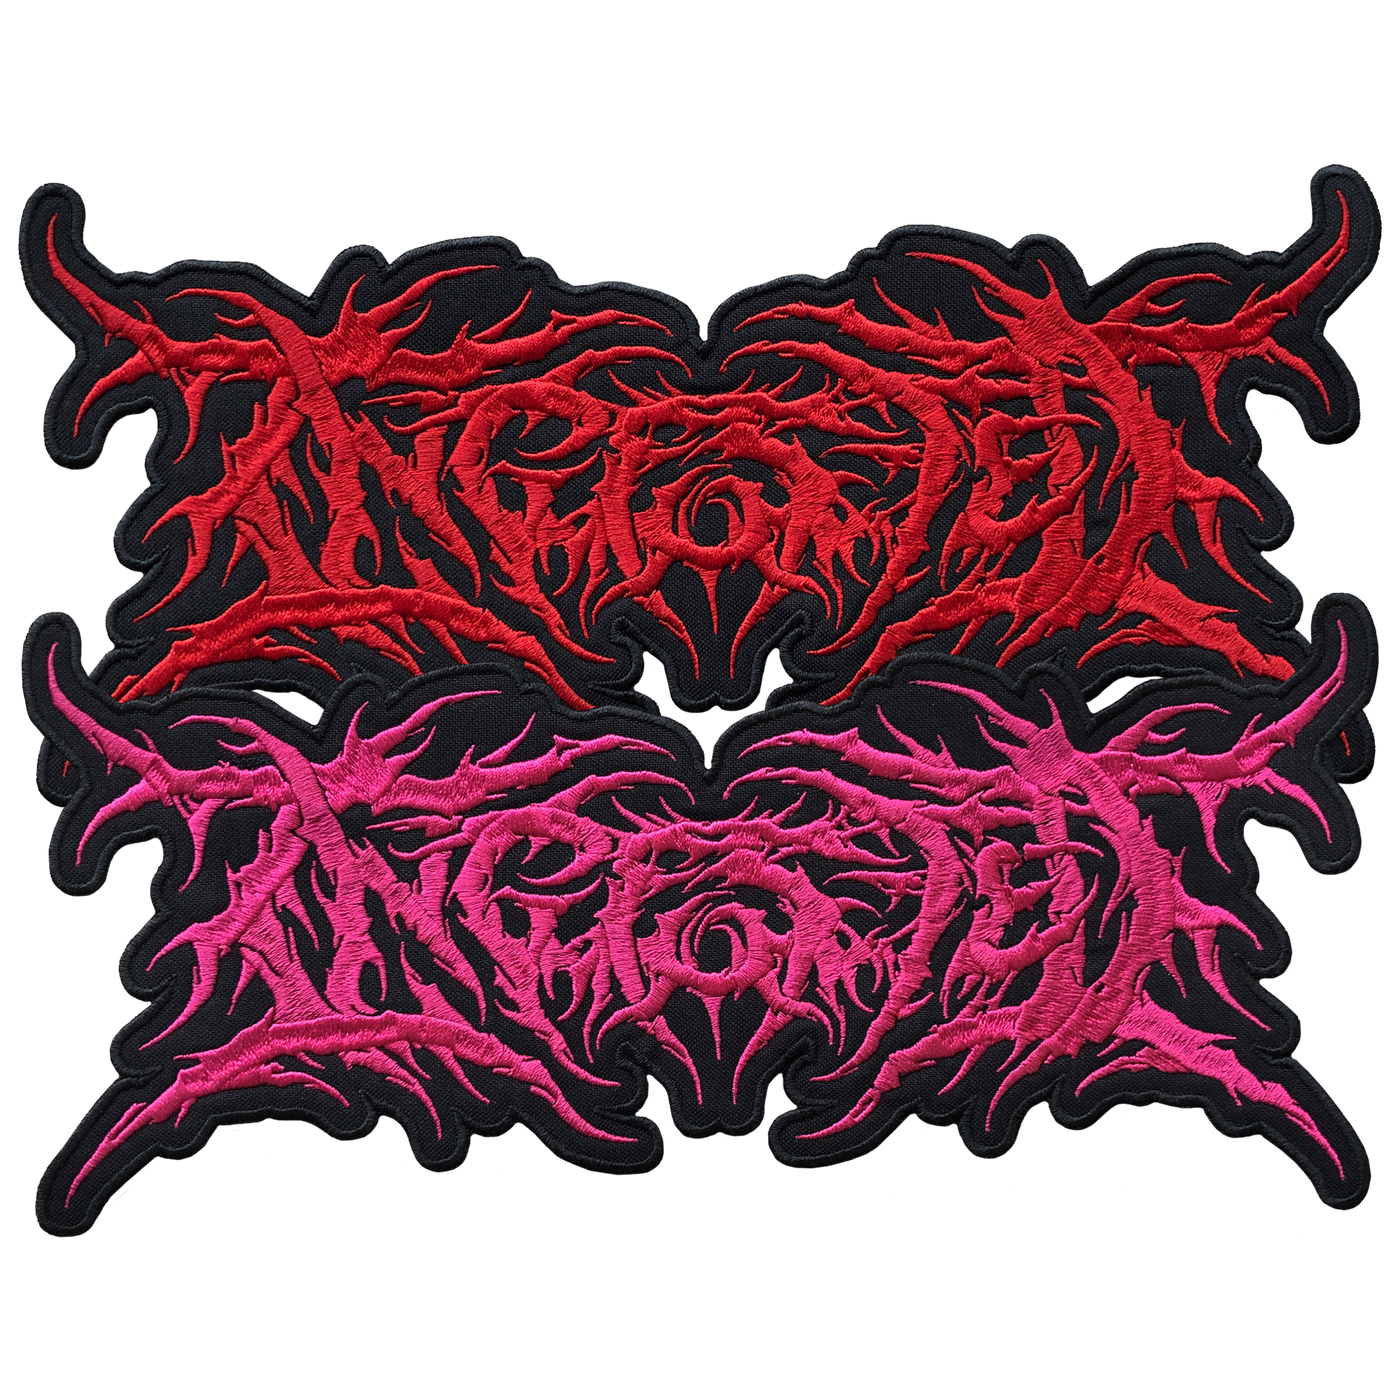 Ingested Backpatches